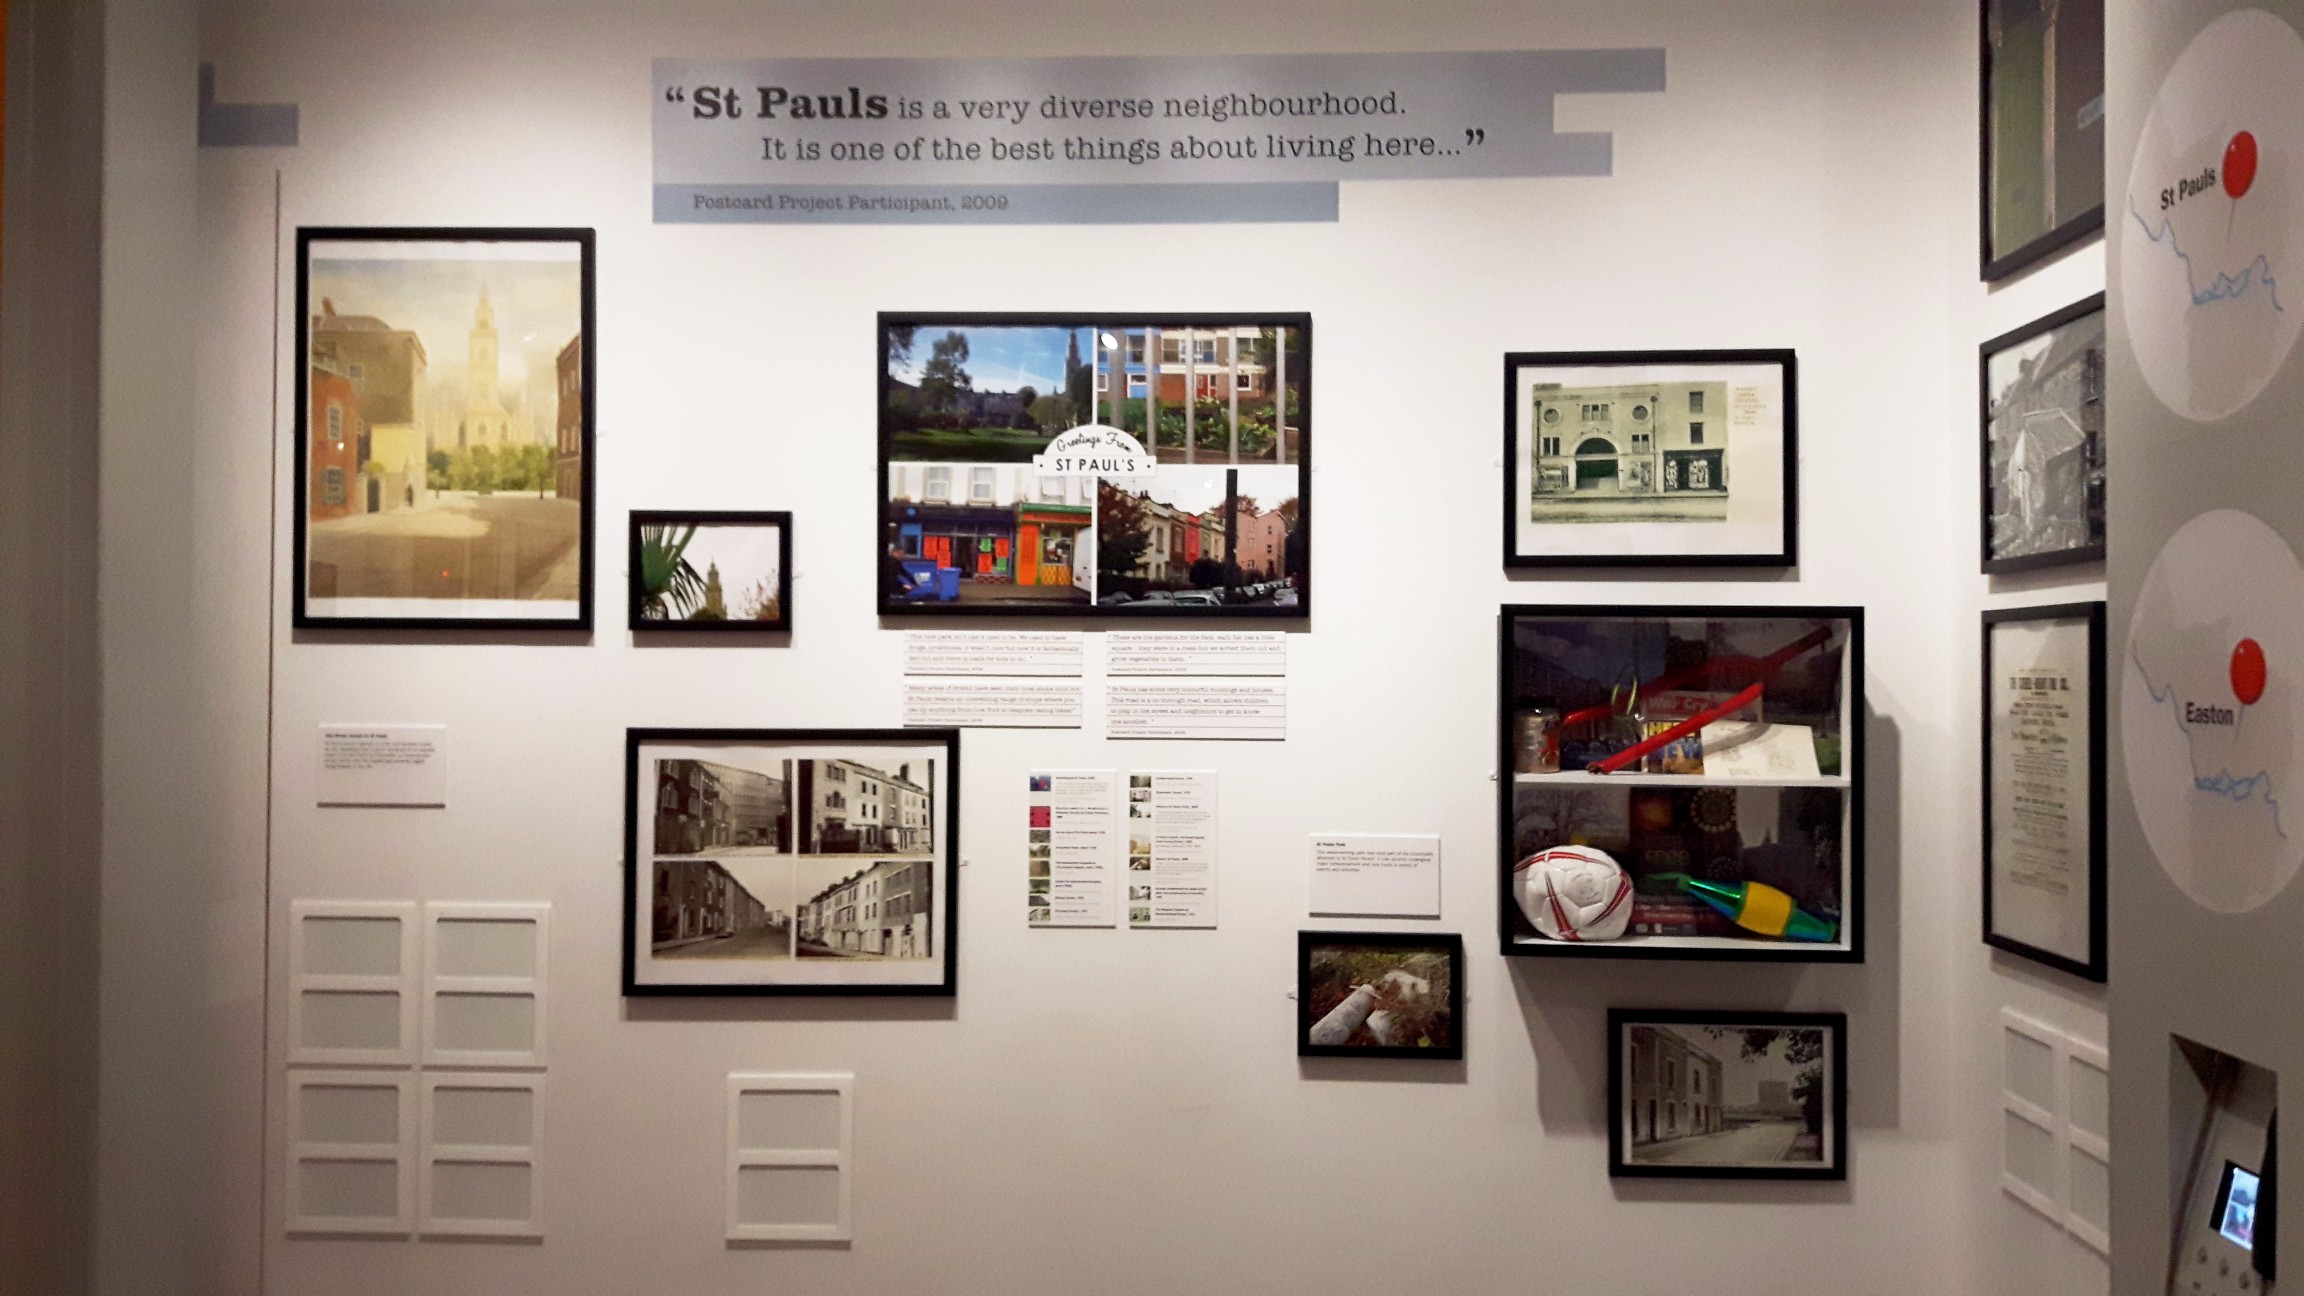 Photo of St. Paul's display in M Shed's Place Gallery, showing images and text about community life.